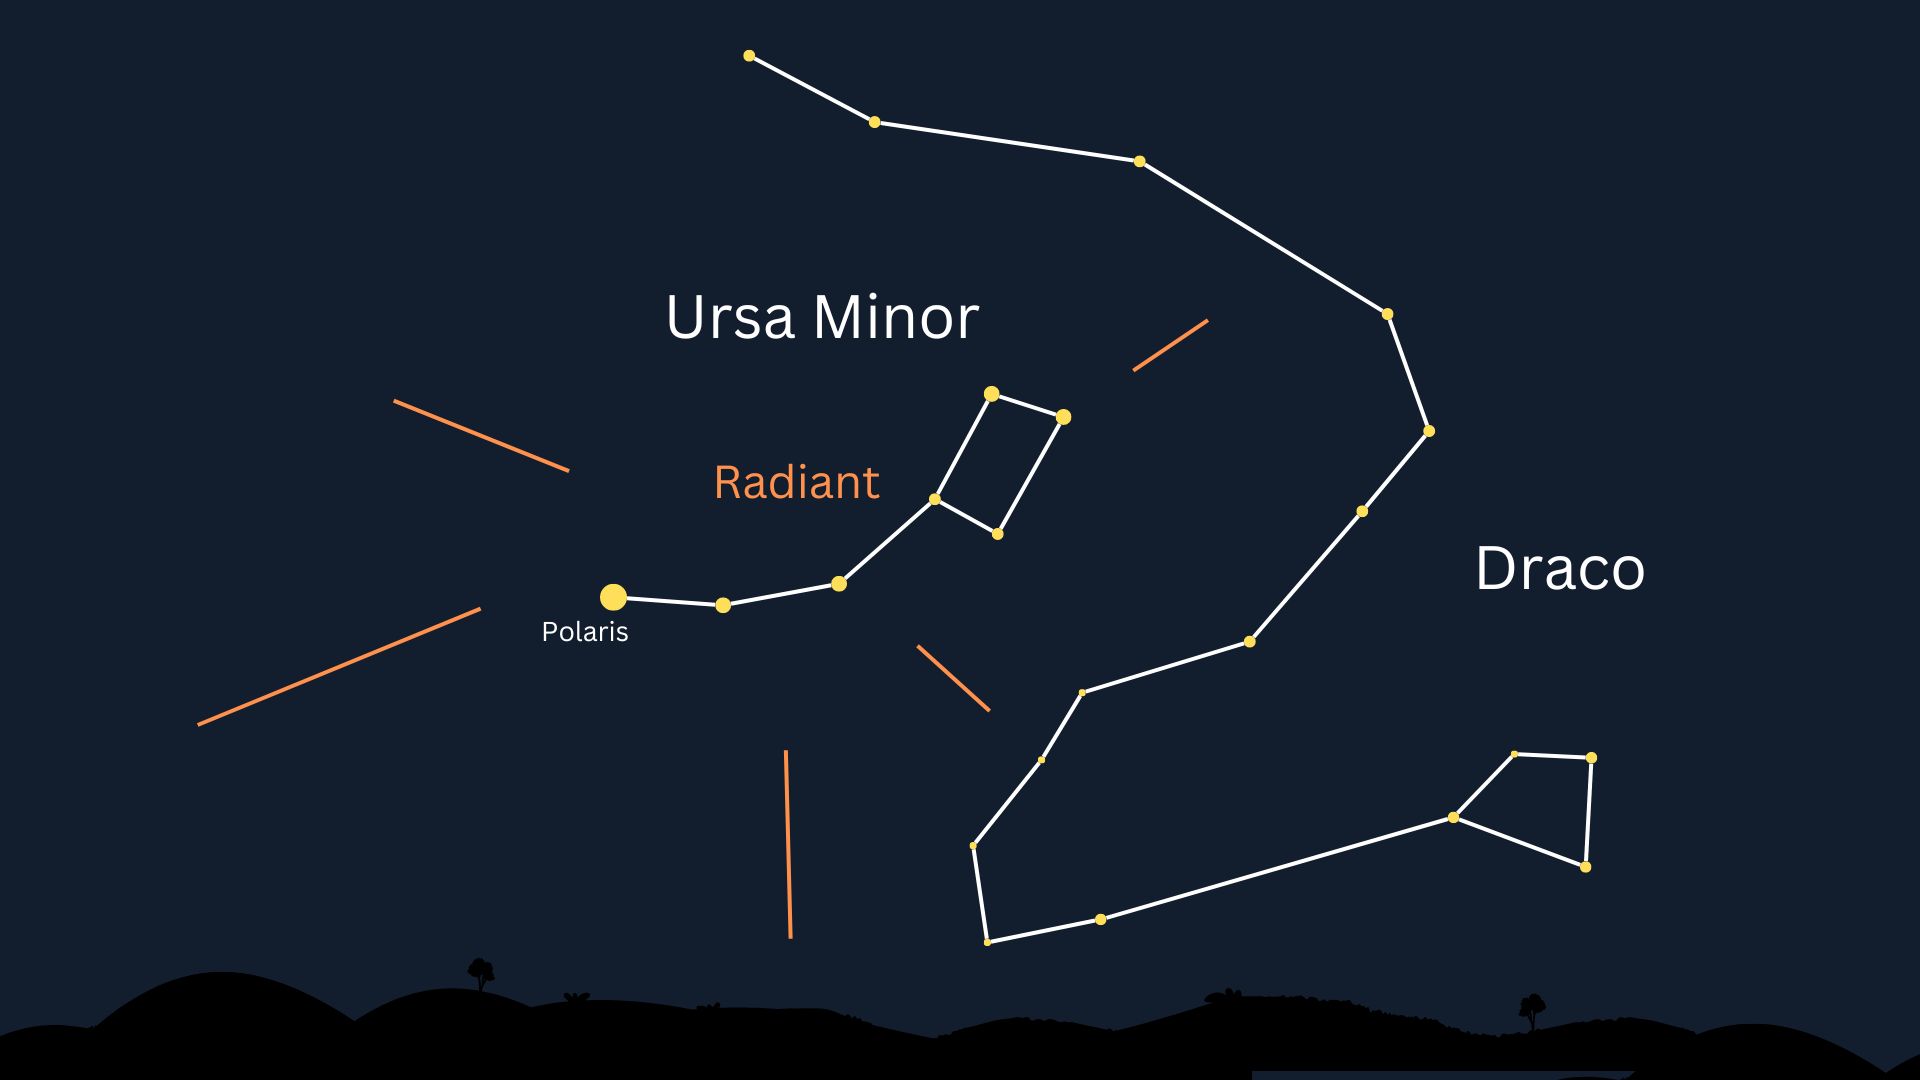 Ursid meteors will appear to radiate from the constellation Ursa Minor, the Little Dipper, in the northern sky.